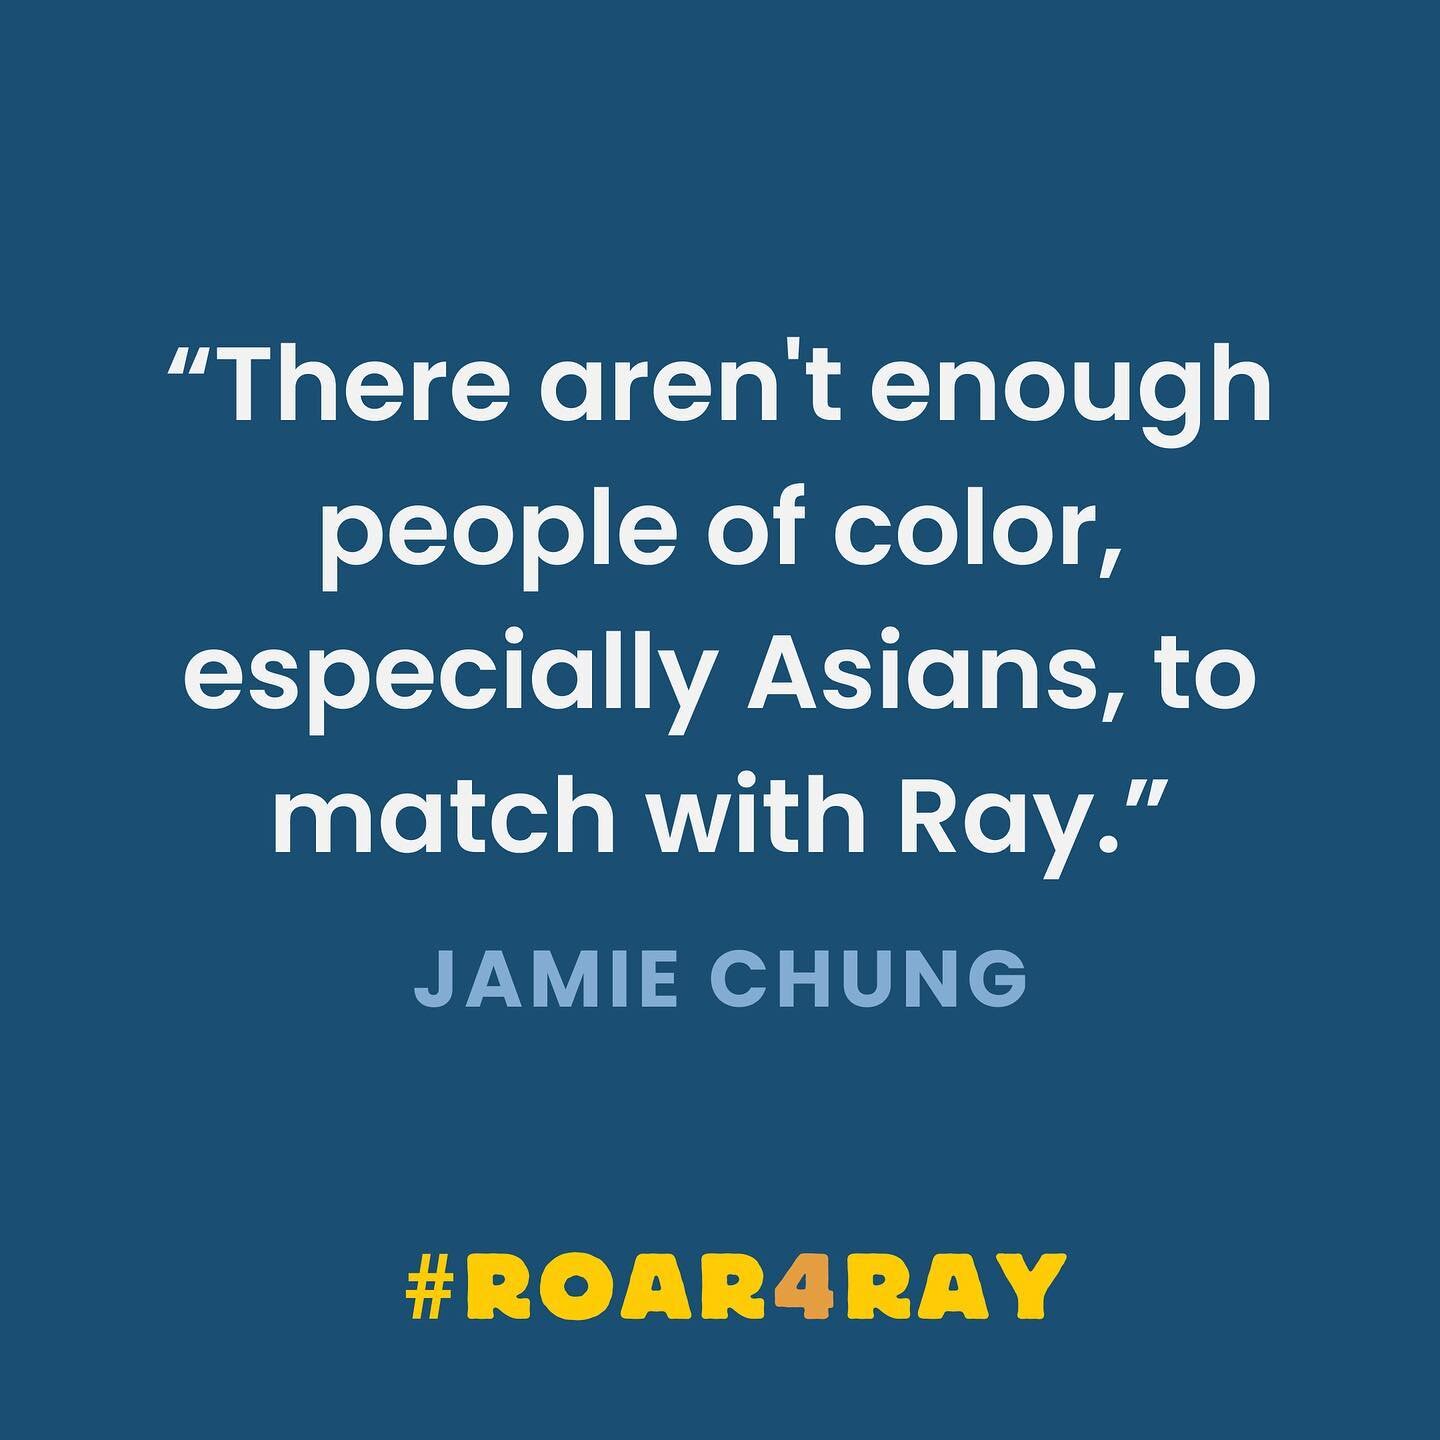 &ldquo;There aren&rsquo;t enough people of color, especially Asians, to match with Ray.&rdquo; - @jamiejchung

We&rsquo;re encouraging minority communities to register and get tested with @bethematch. The odds at finding a match drop significantly if